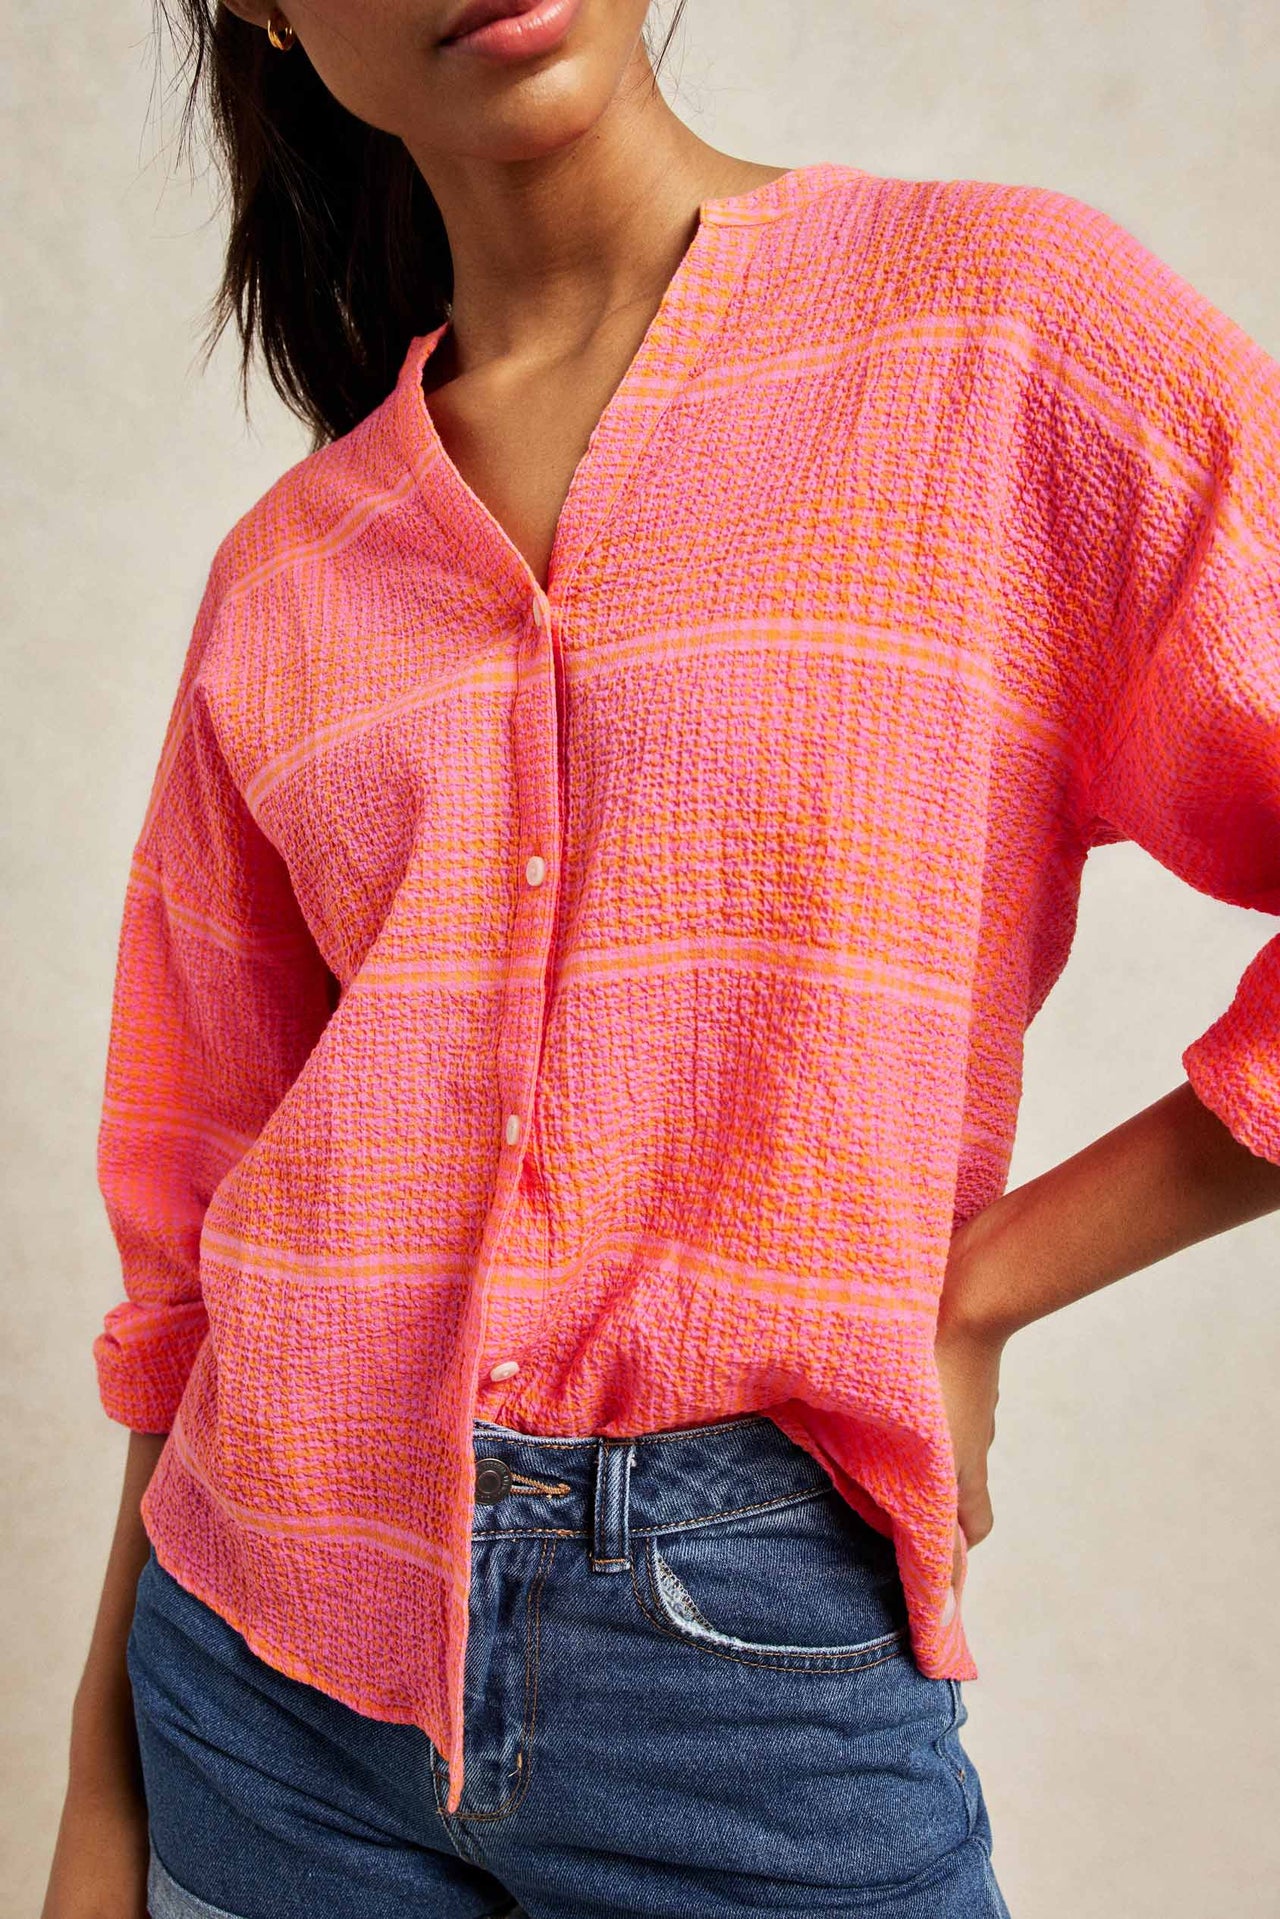 Textured seersucker gingham shirt with Nehru collar. Cut from seersucker cotton and patterned with vibrant orange and pink checks. An effortless boyfriend fit with drop shoulders and blouson sleeves. Casual wear. Size XS, S, M, L, XL. Made in Portugal. Machine wash.